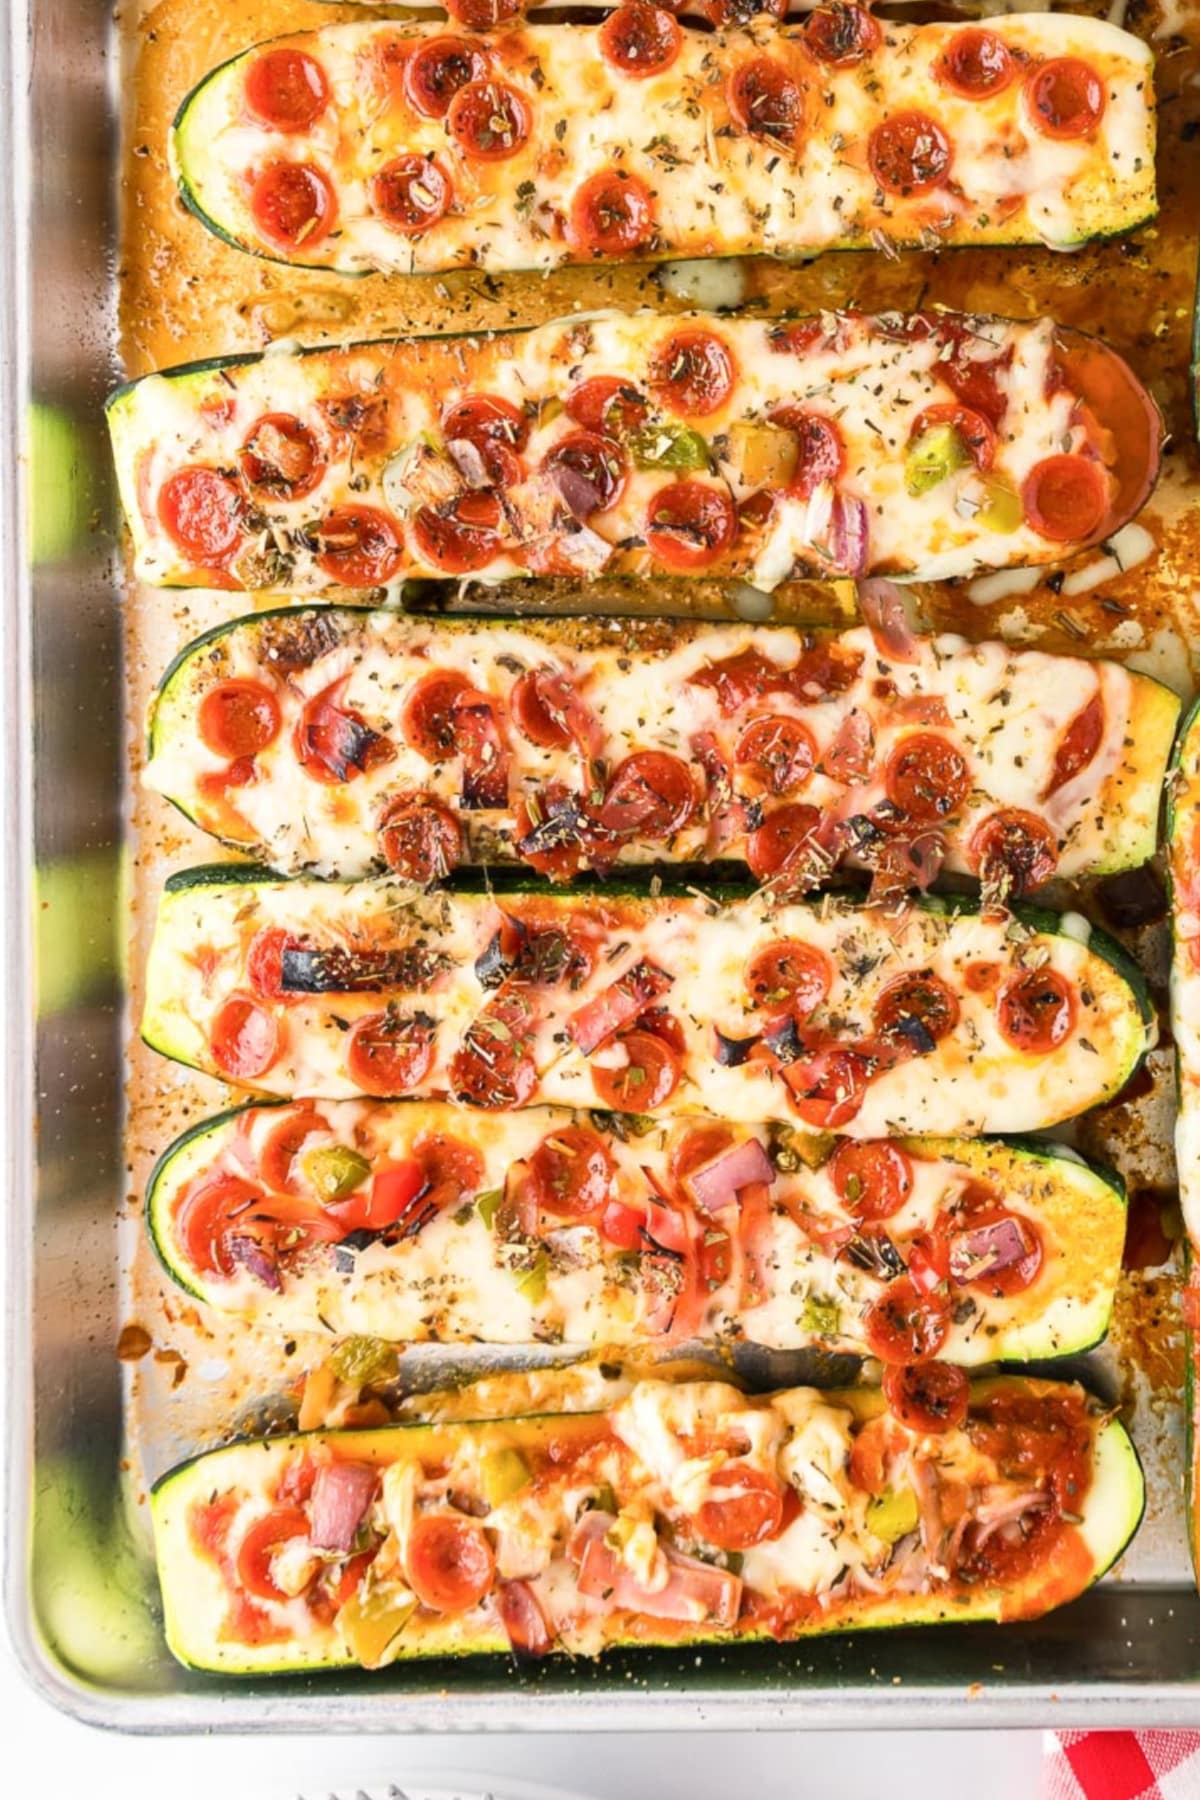 A tray of baked zucchini pizza boats topped with melted cheese, mini pepperoni slices, and various chopped vegetables.